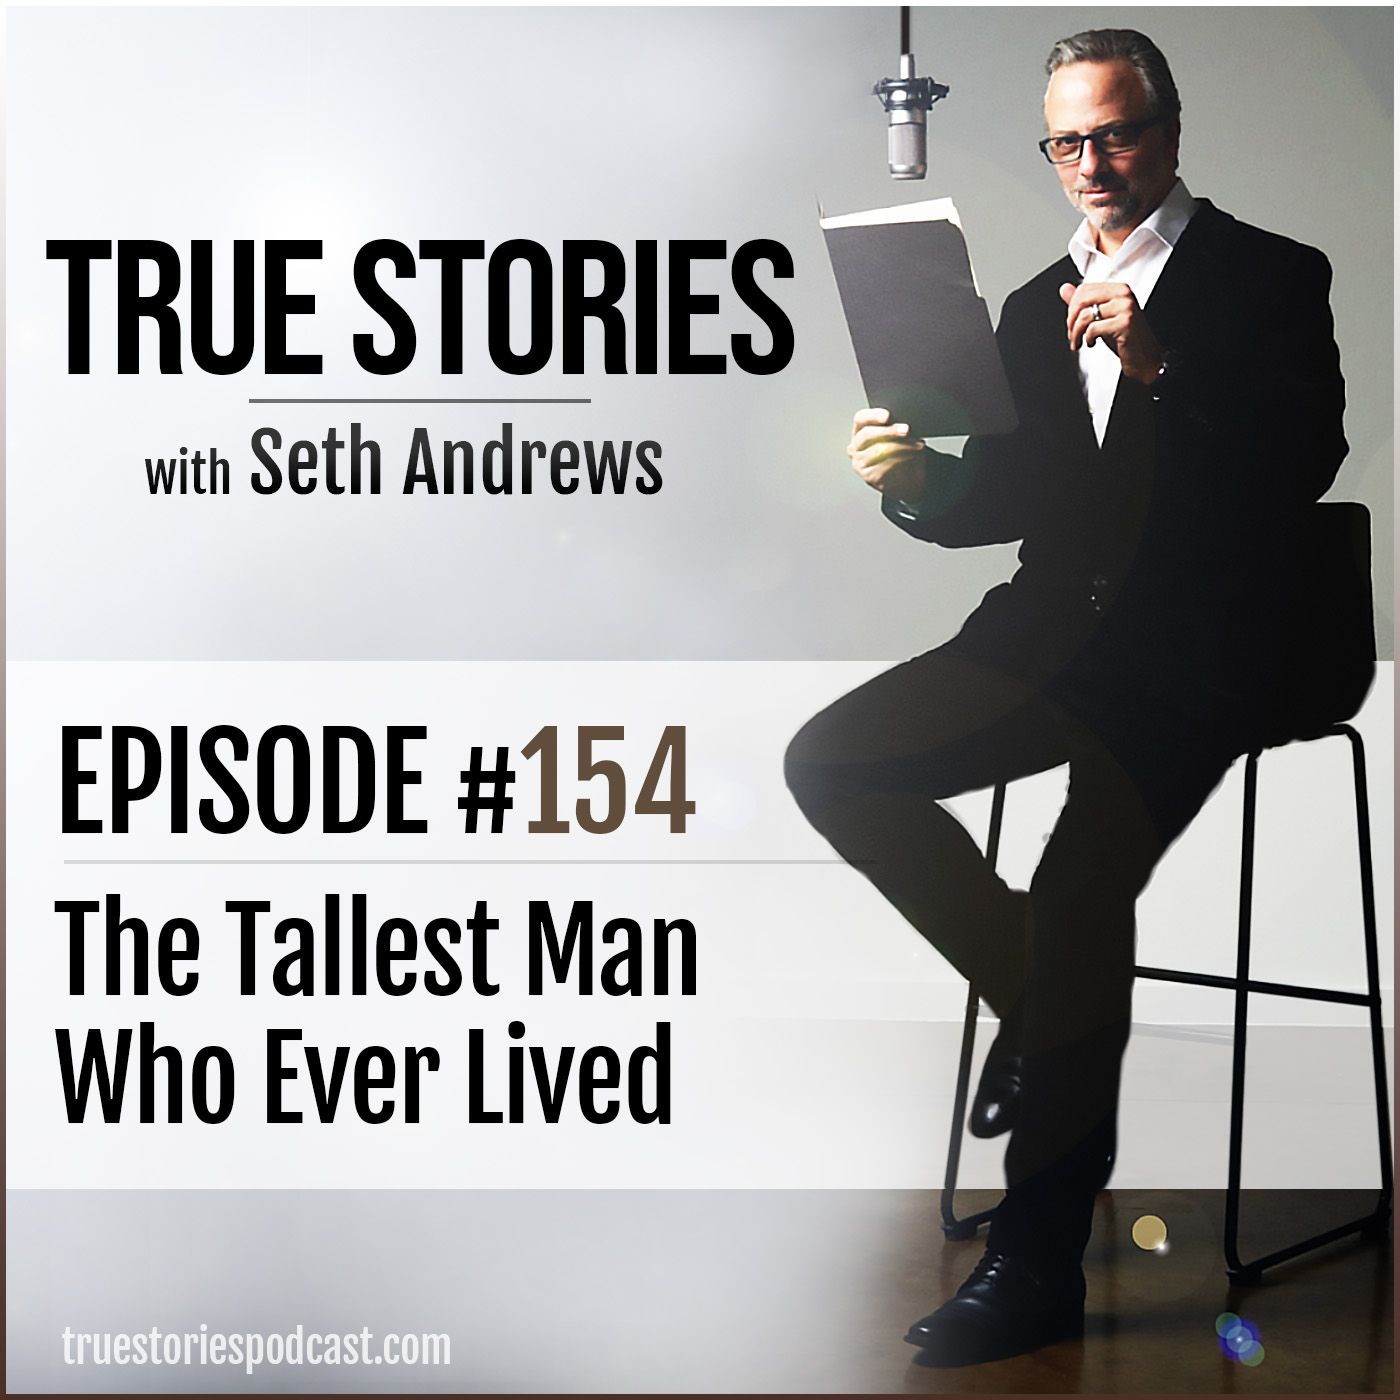 True Stories #154 - The Tallest Man Who Ever Lived